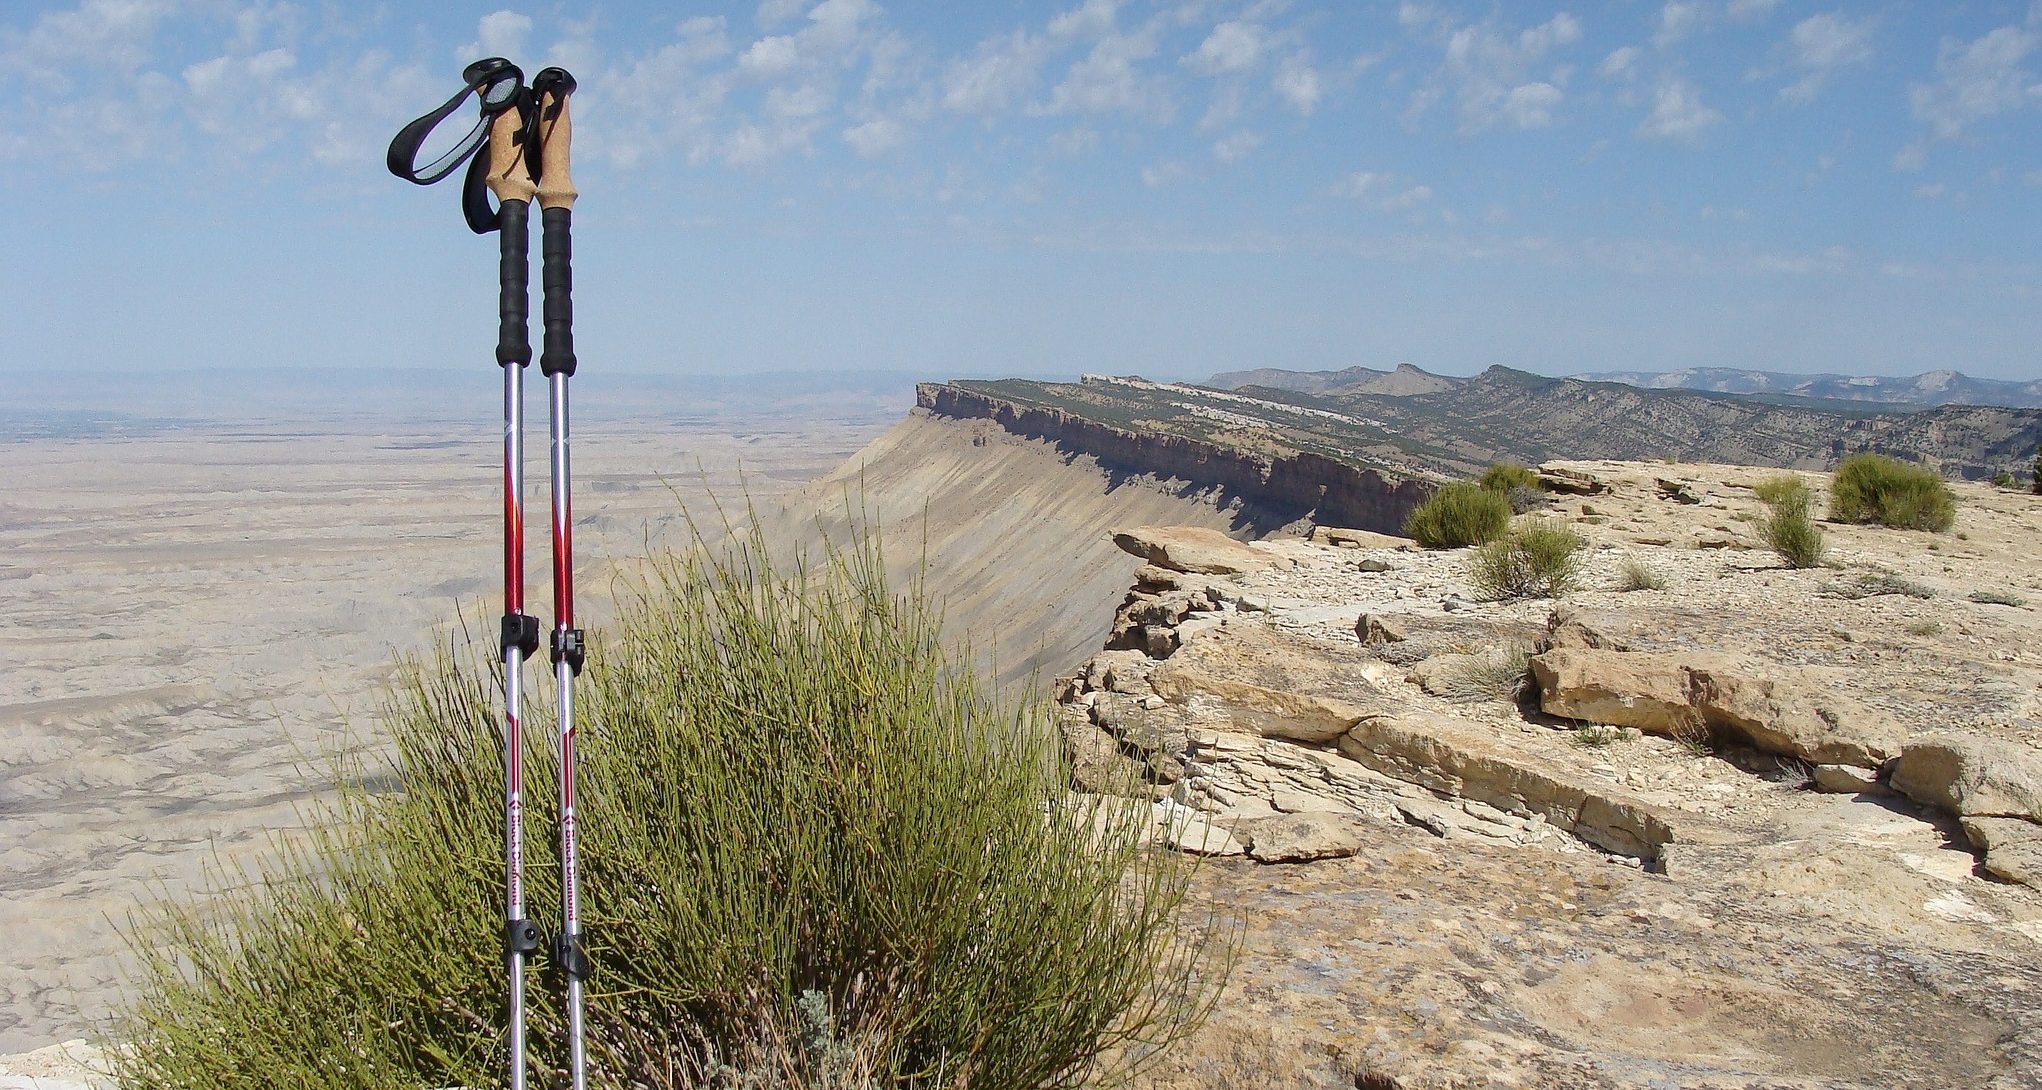 Should you use one or two trekking poles? - Hikeheaven